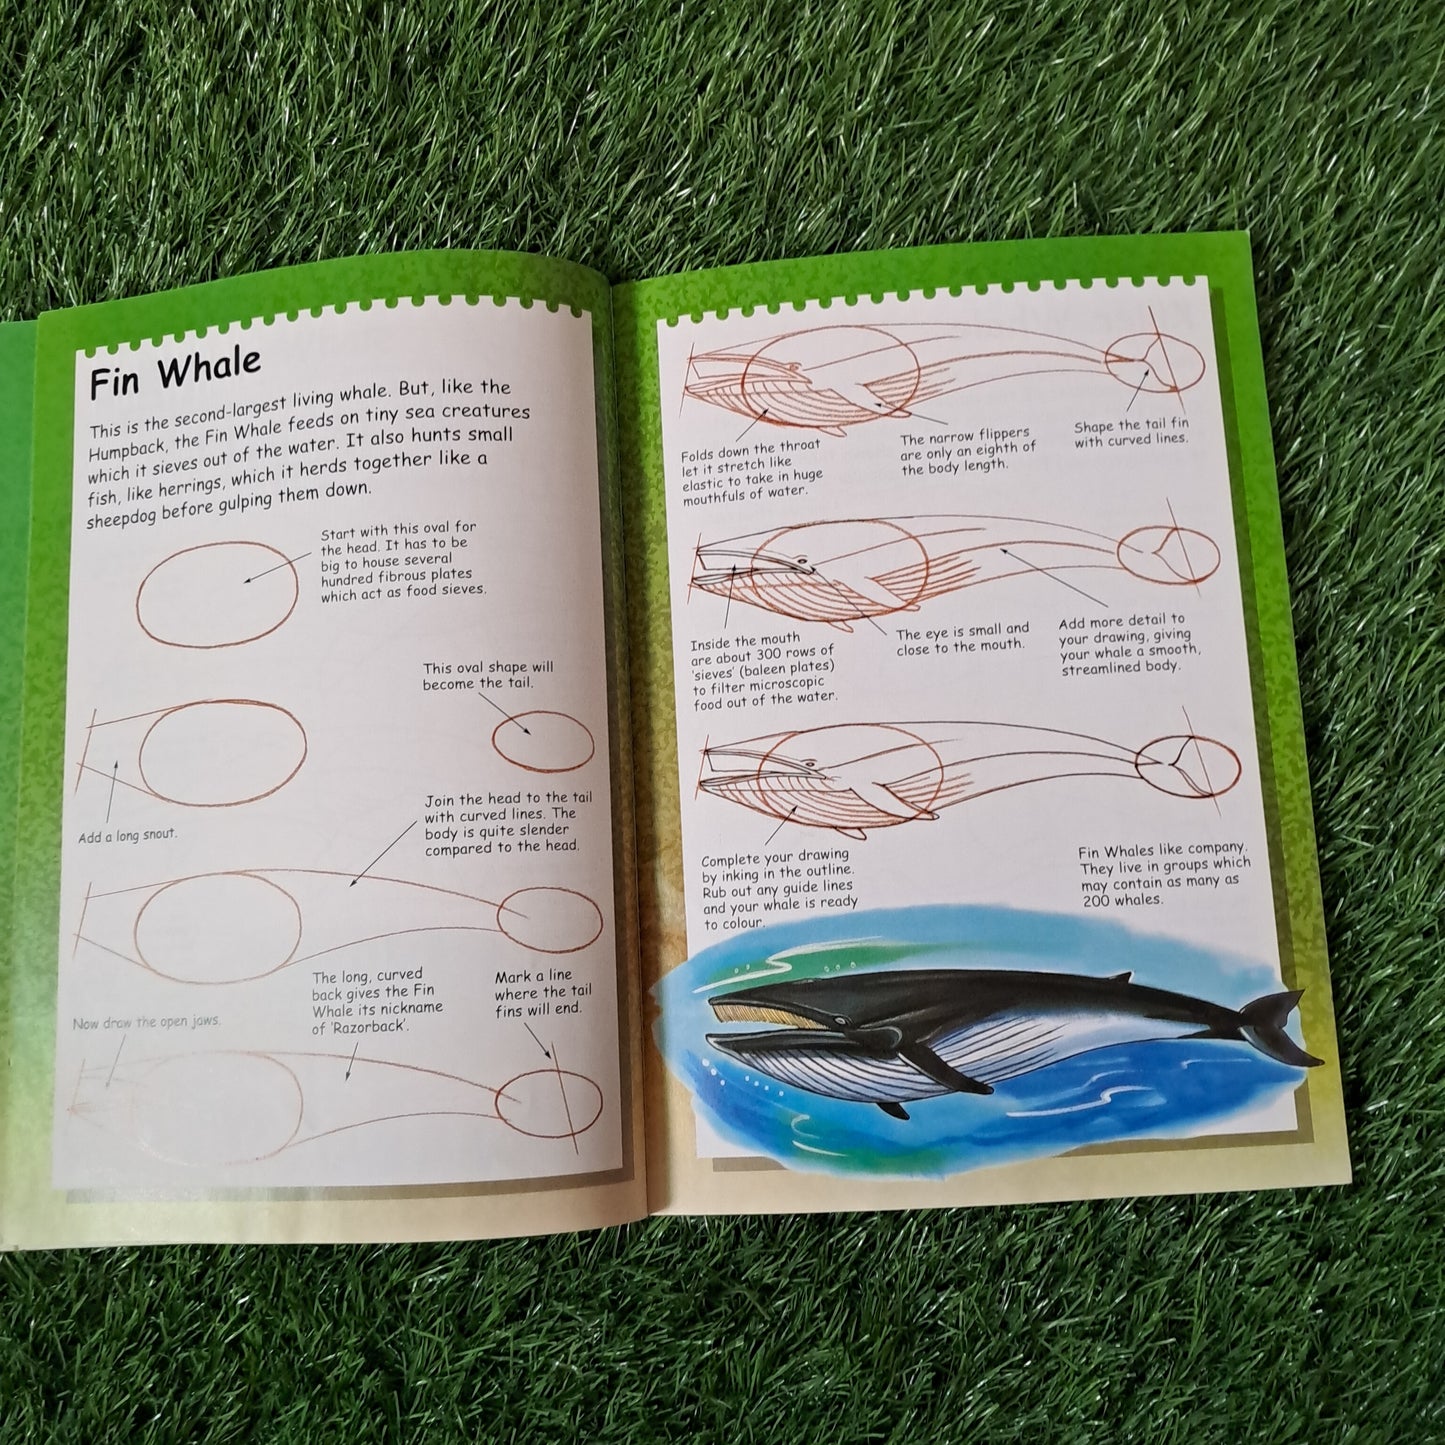 I Can Draw Shark, Whales& Dolphins